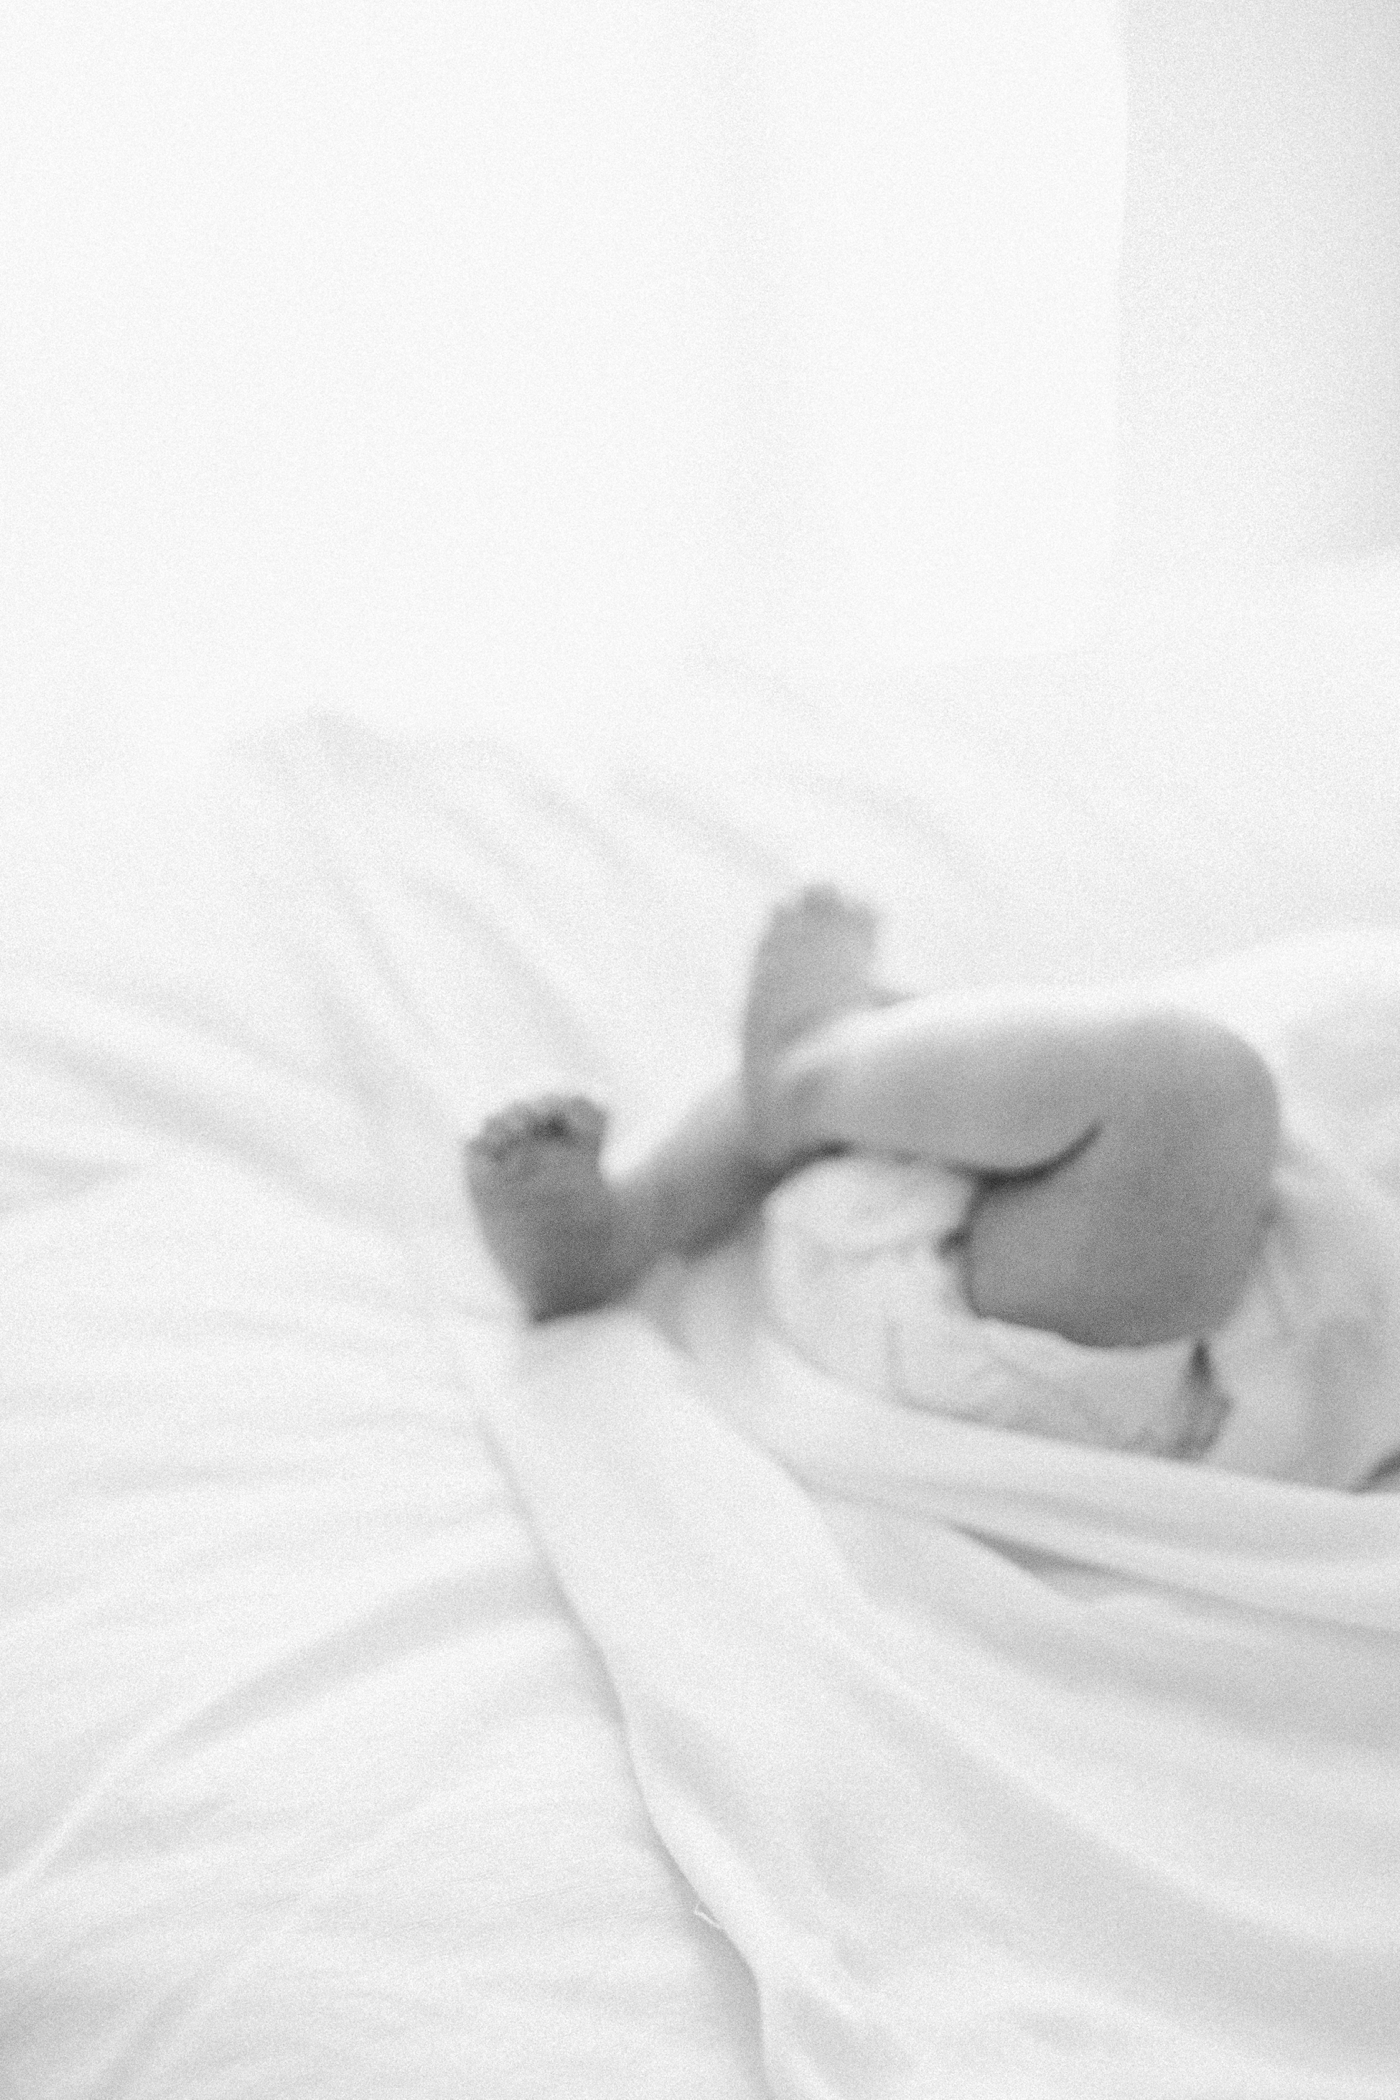 Black and white photo of newborn baby feet | Photo by Caitlyn Motycka Photography.